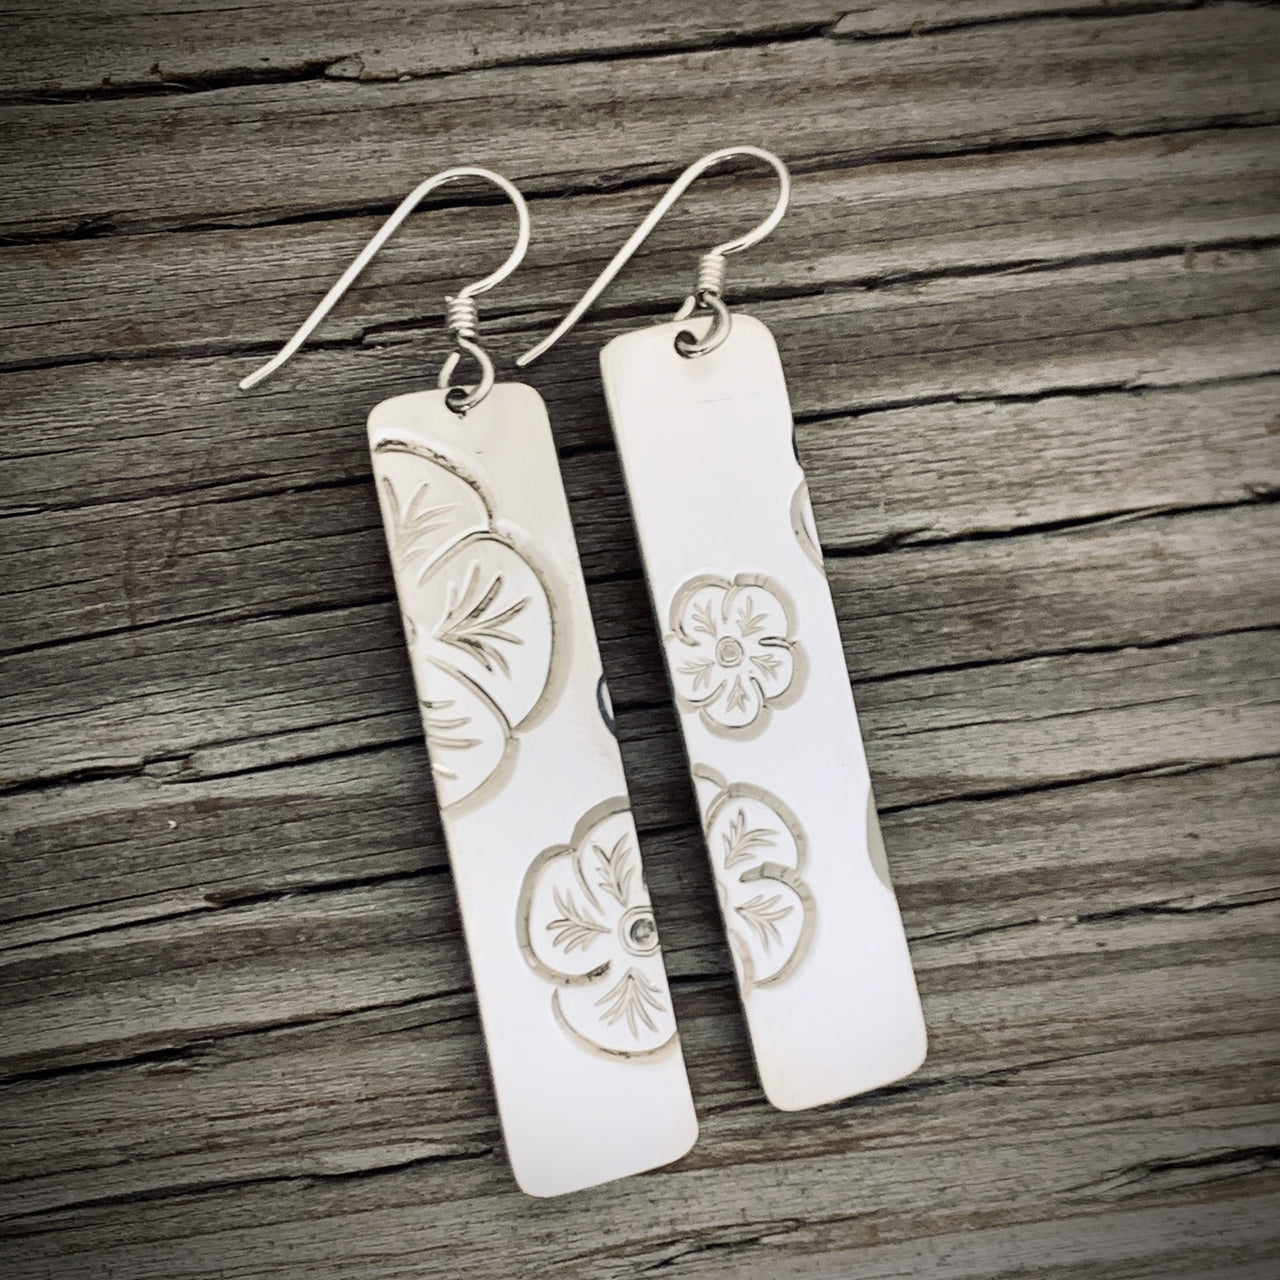 Sitka Rose Earrings by Rob Martin